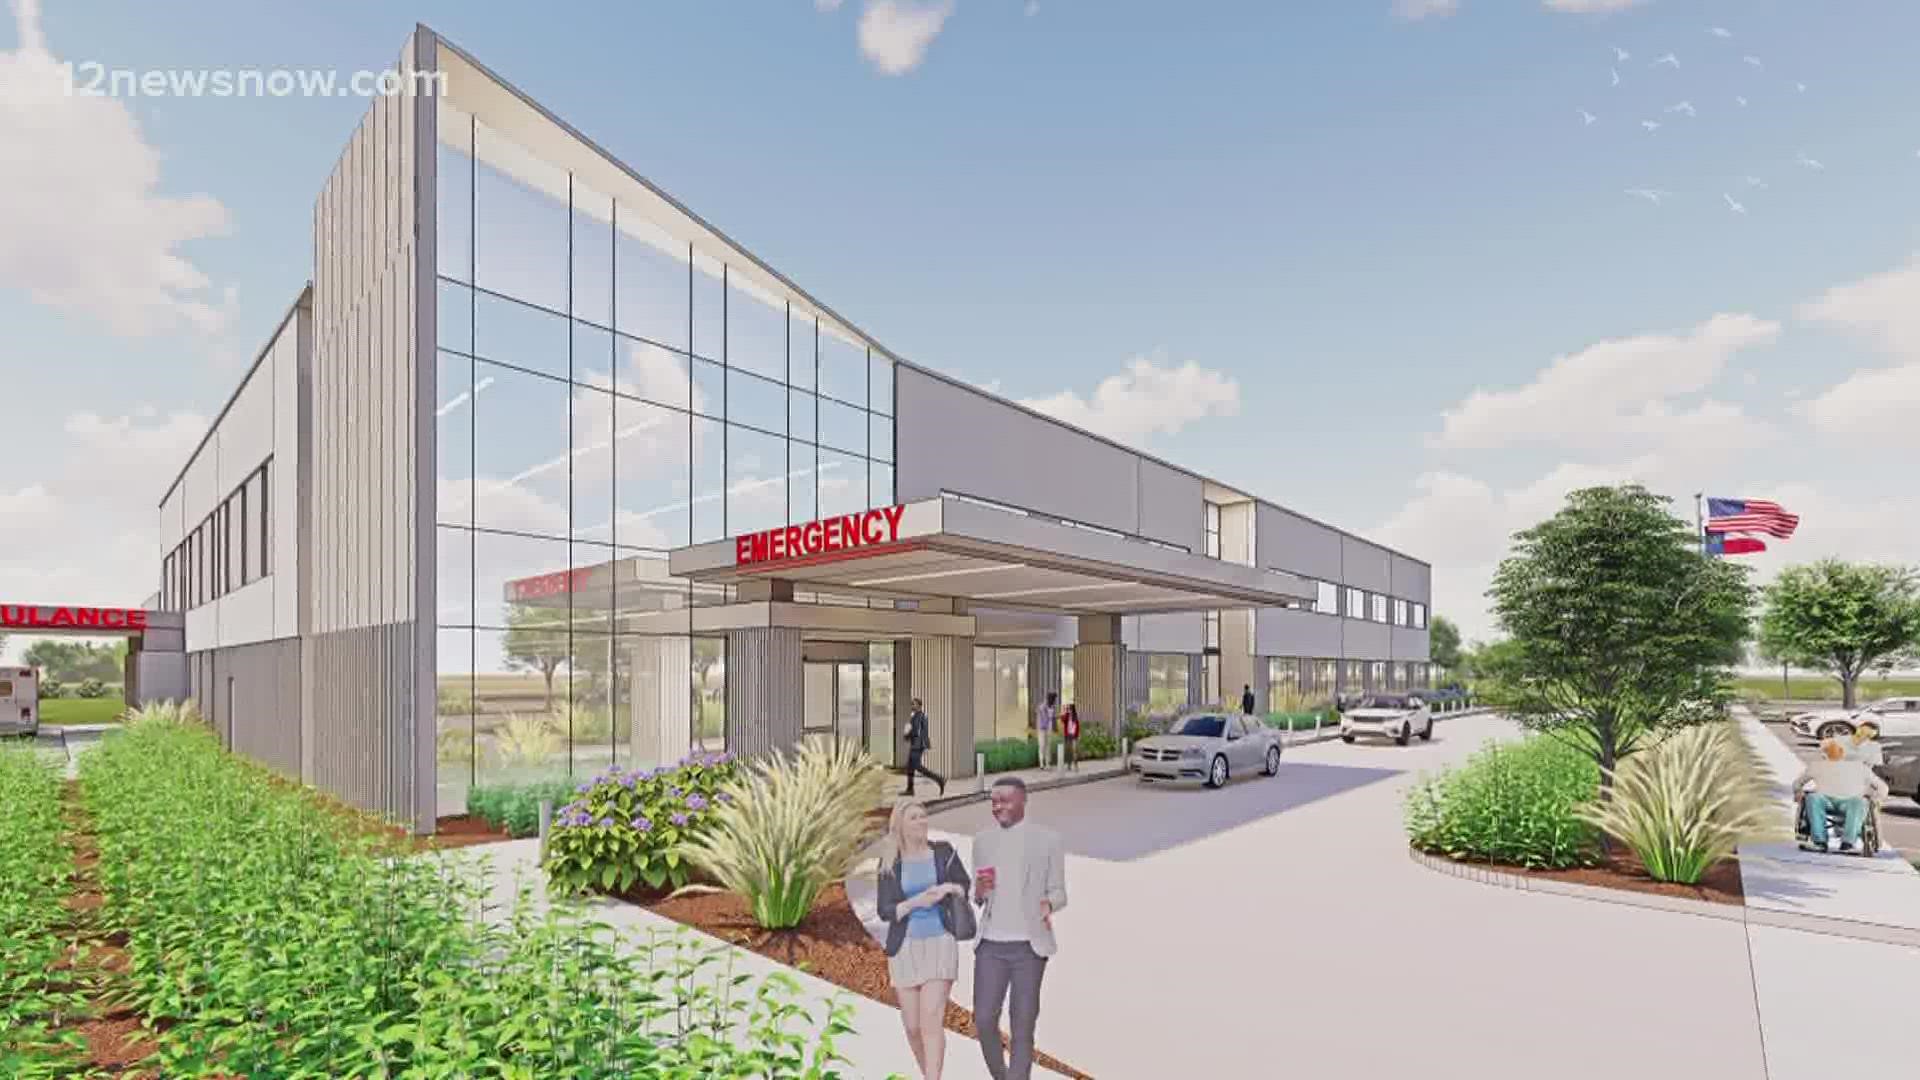 NexCore says the mini-medical campus will fill the community need for healthcare services following the closure of Baptist Hospital Orange.